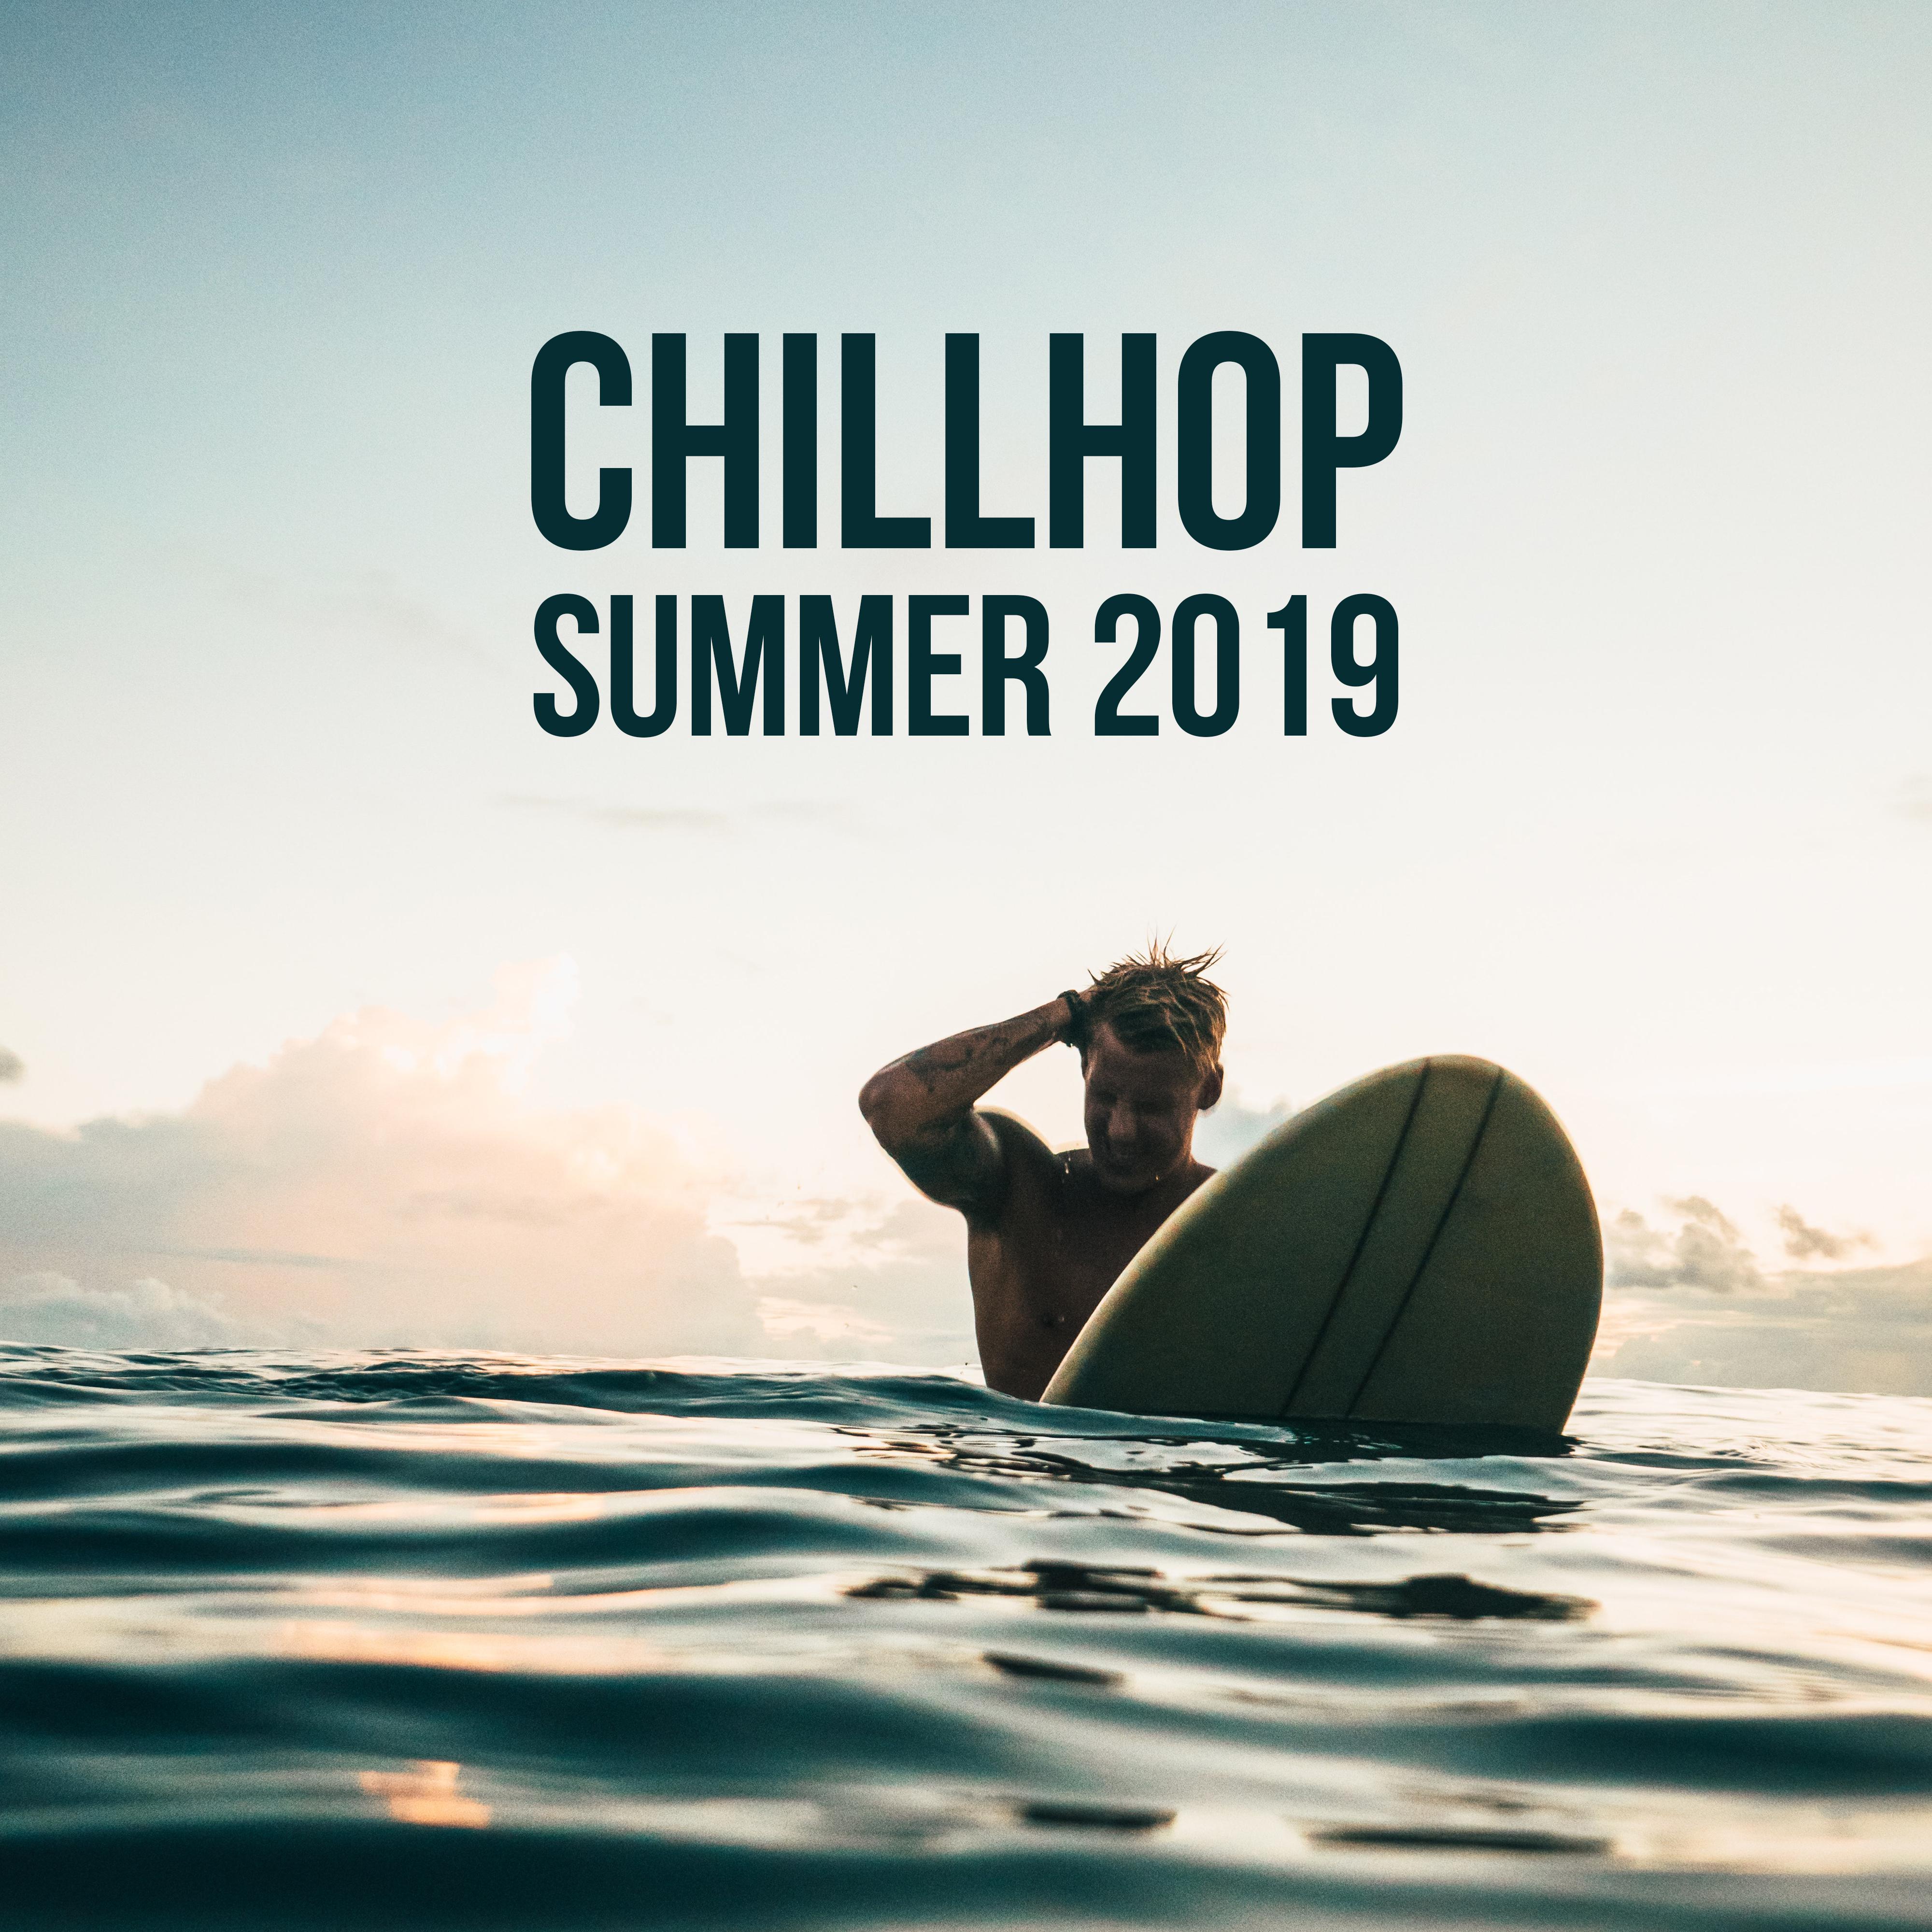 Chillhop Summer 2019 – Ibiza Chill Out, Beach Party, Summer Relax, Ibiza Lounge, Total Chill, Beach Melodies